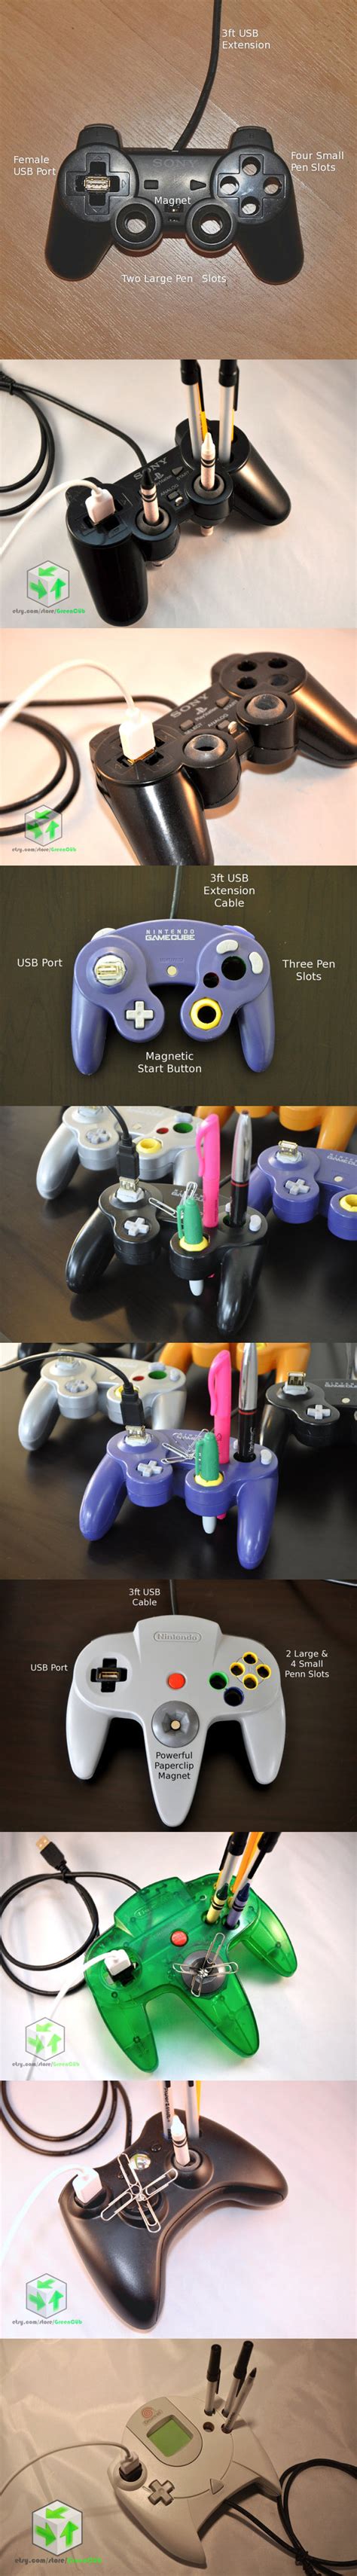 finding a use for your old controllers controllers gaming funny